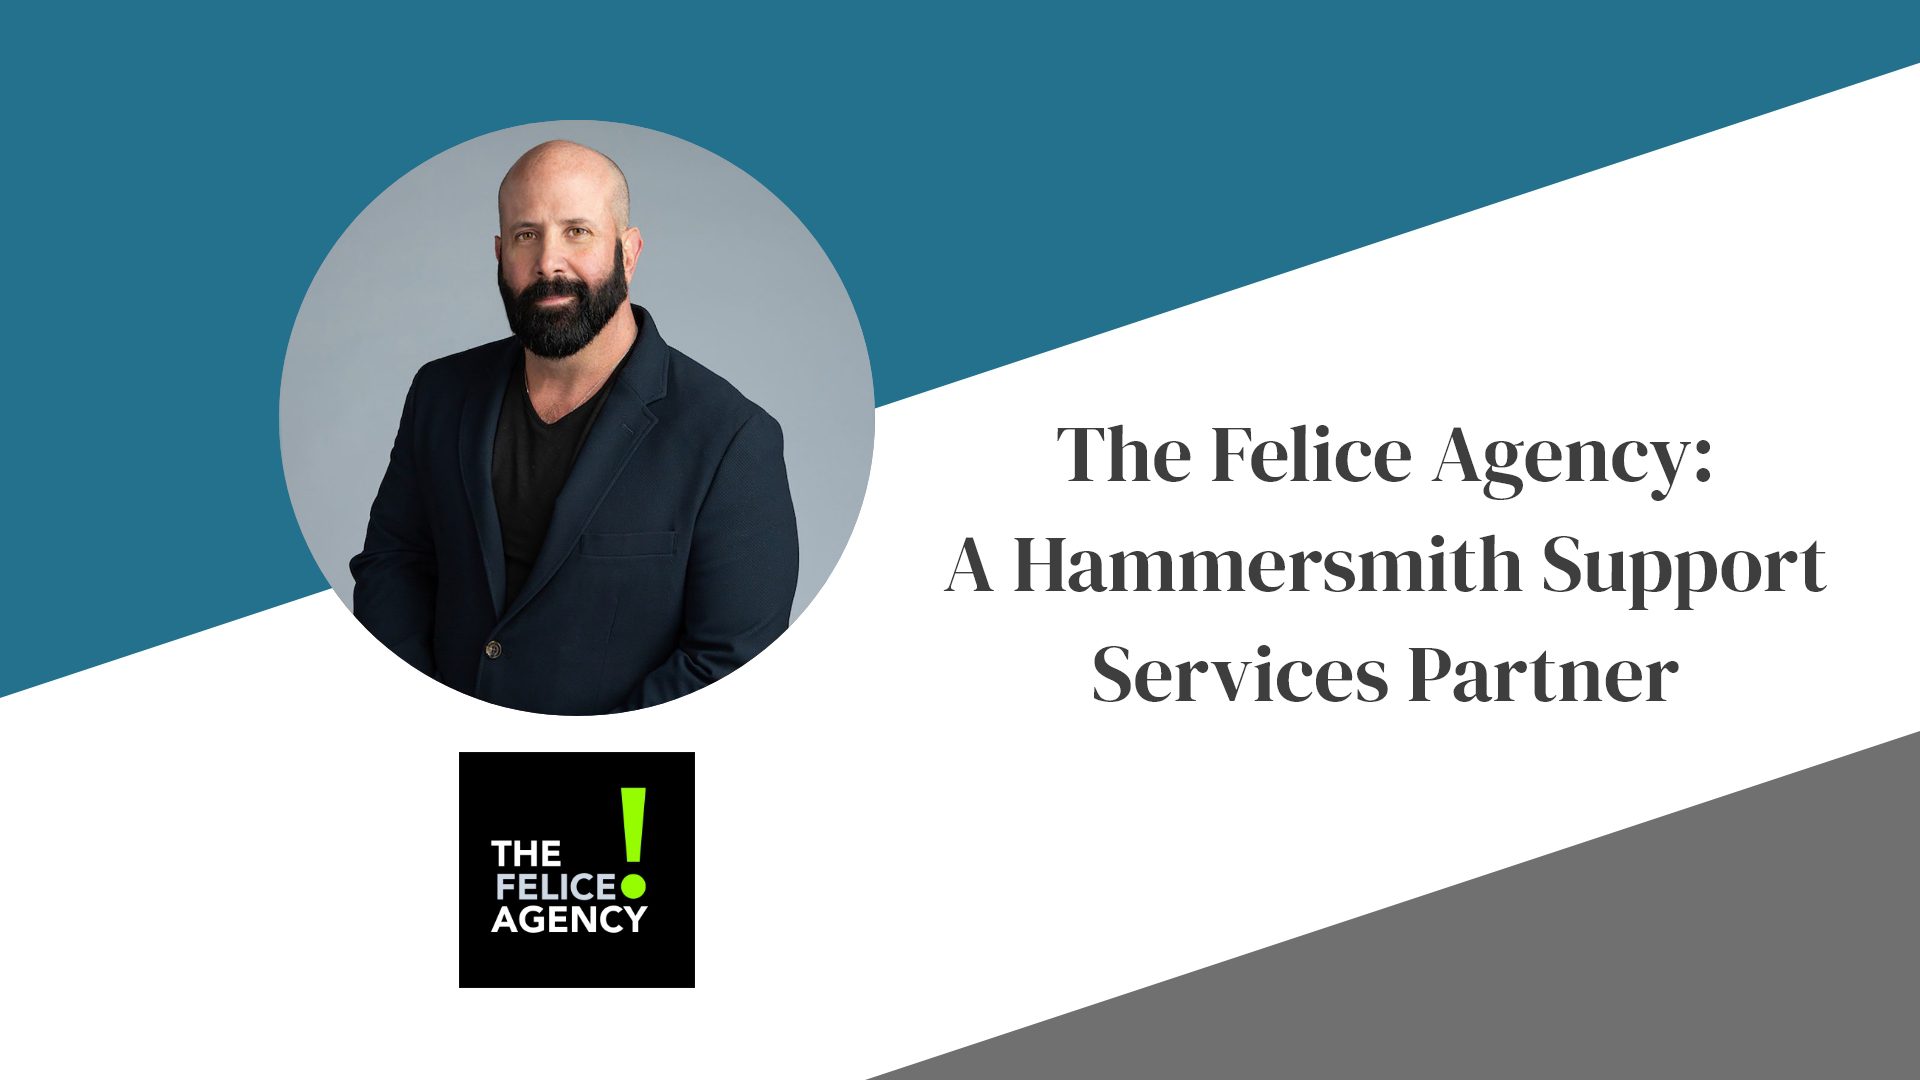 The Felice Agency: A Hammersmith Support Services Partner